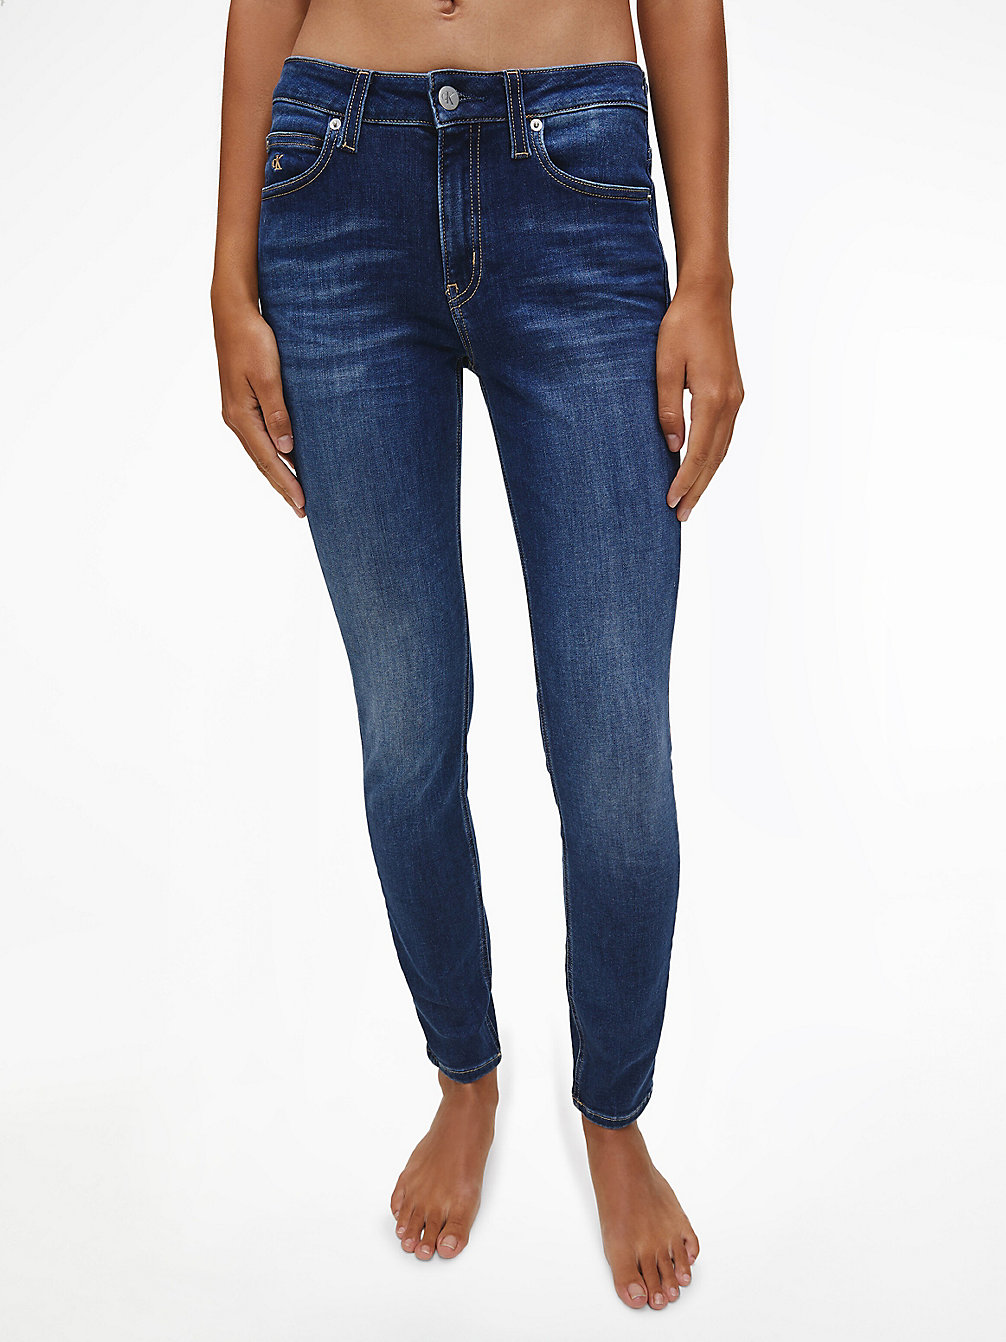 ZZ001 MID BLUE > Jeansy Mid Rise Skinny > undefined Kobiety - Calvin Klein